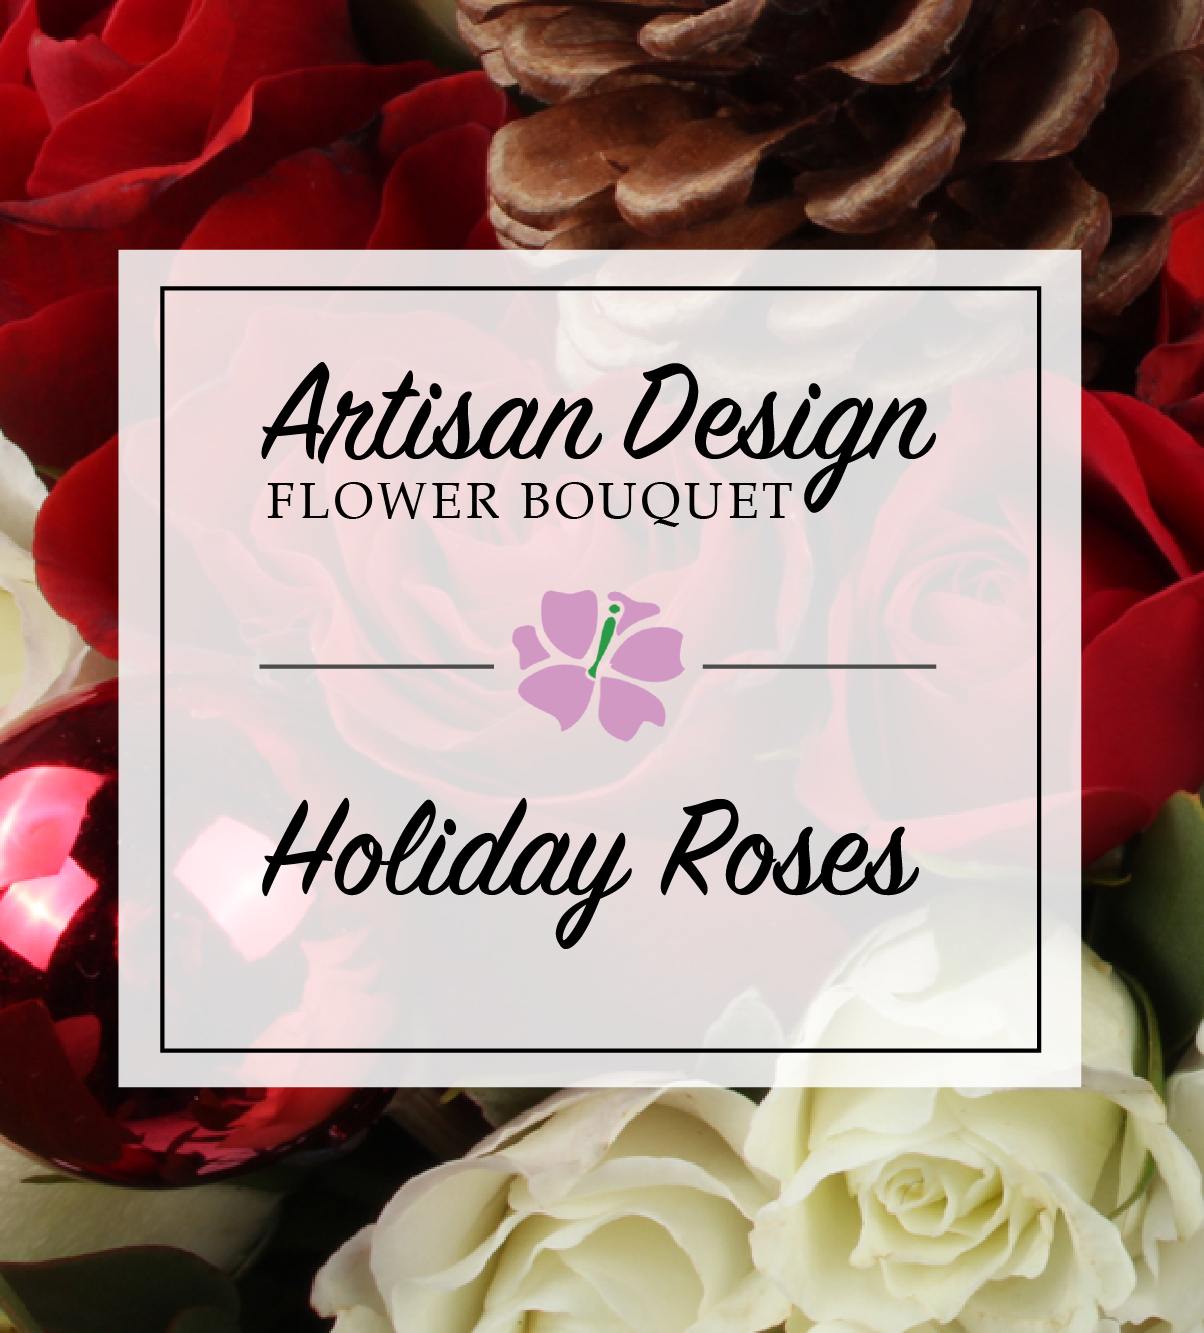 Artist's Design: Holiday Roses